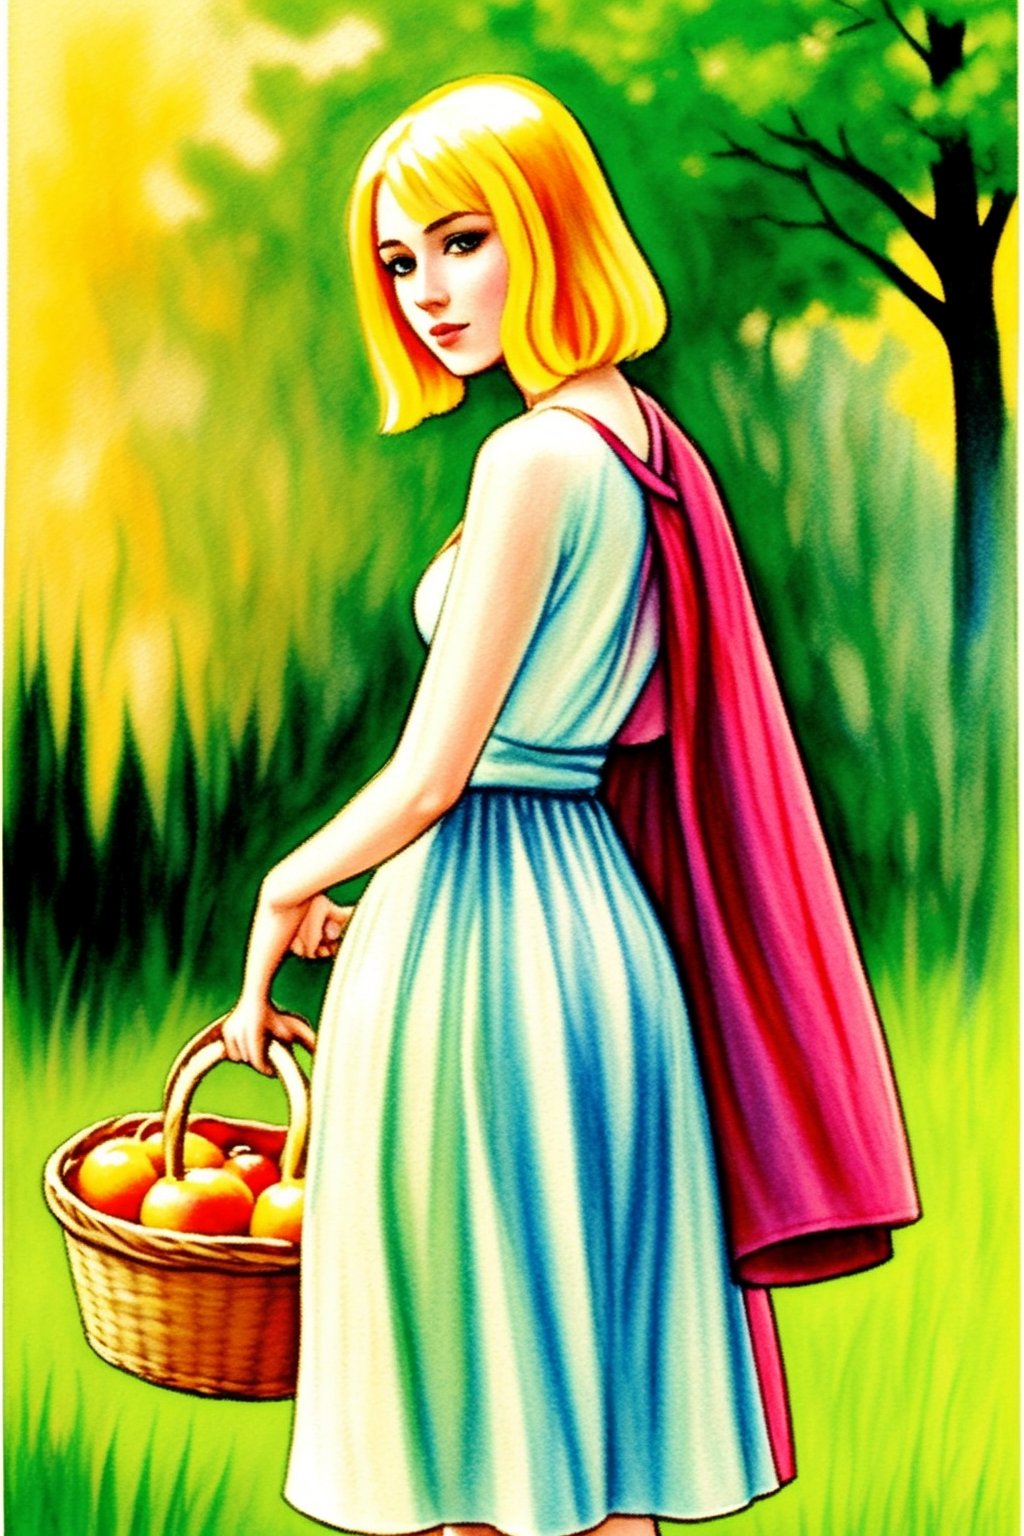  a drawing of a woman walking at forest holding a basket with apples,  milo manara, milo manara style, milo manara h 0 0, manara, illiustration style of manara, painted in watercolor, impressive create such great beauty with effective technique shadows, light, shades of color providing depth, all of this, makes the illiustration art so vivid, and exalts the female figures it is remarkable how in this image natural scenarios that act as a background for the sensual protagonist of the illustration: water, sun, wind, underline the "en plein air" impressionist vein of the bodies modeled by brushstrokes, Ptcard,,<lora:659111690174031528:1.0>